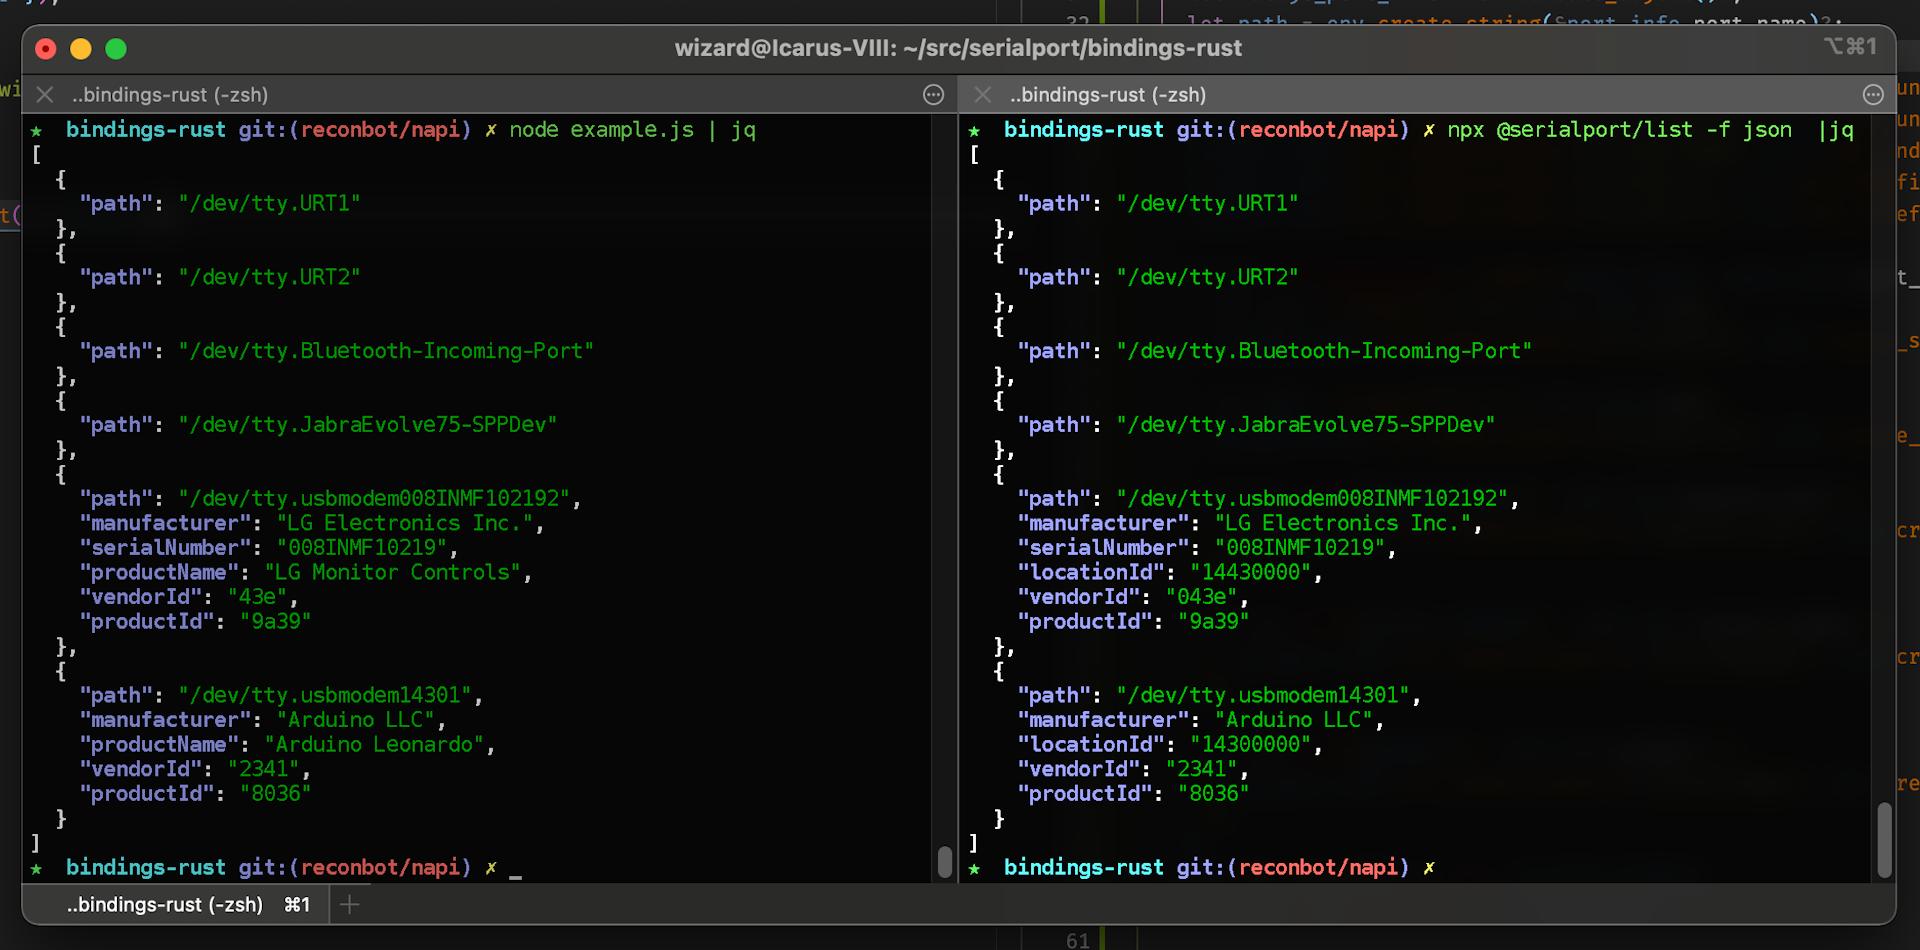 a side by side comparison of @serialport/list and my rust bindings prototype